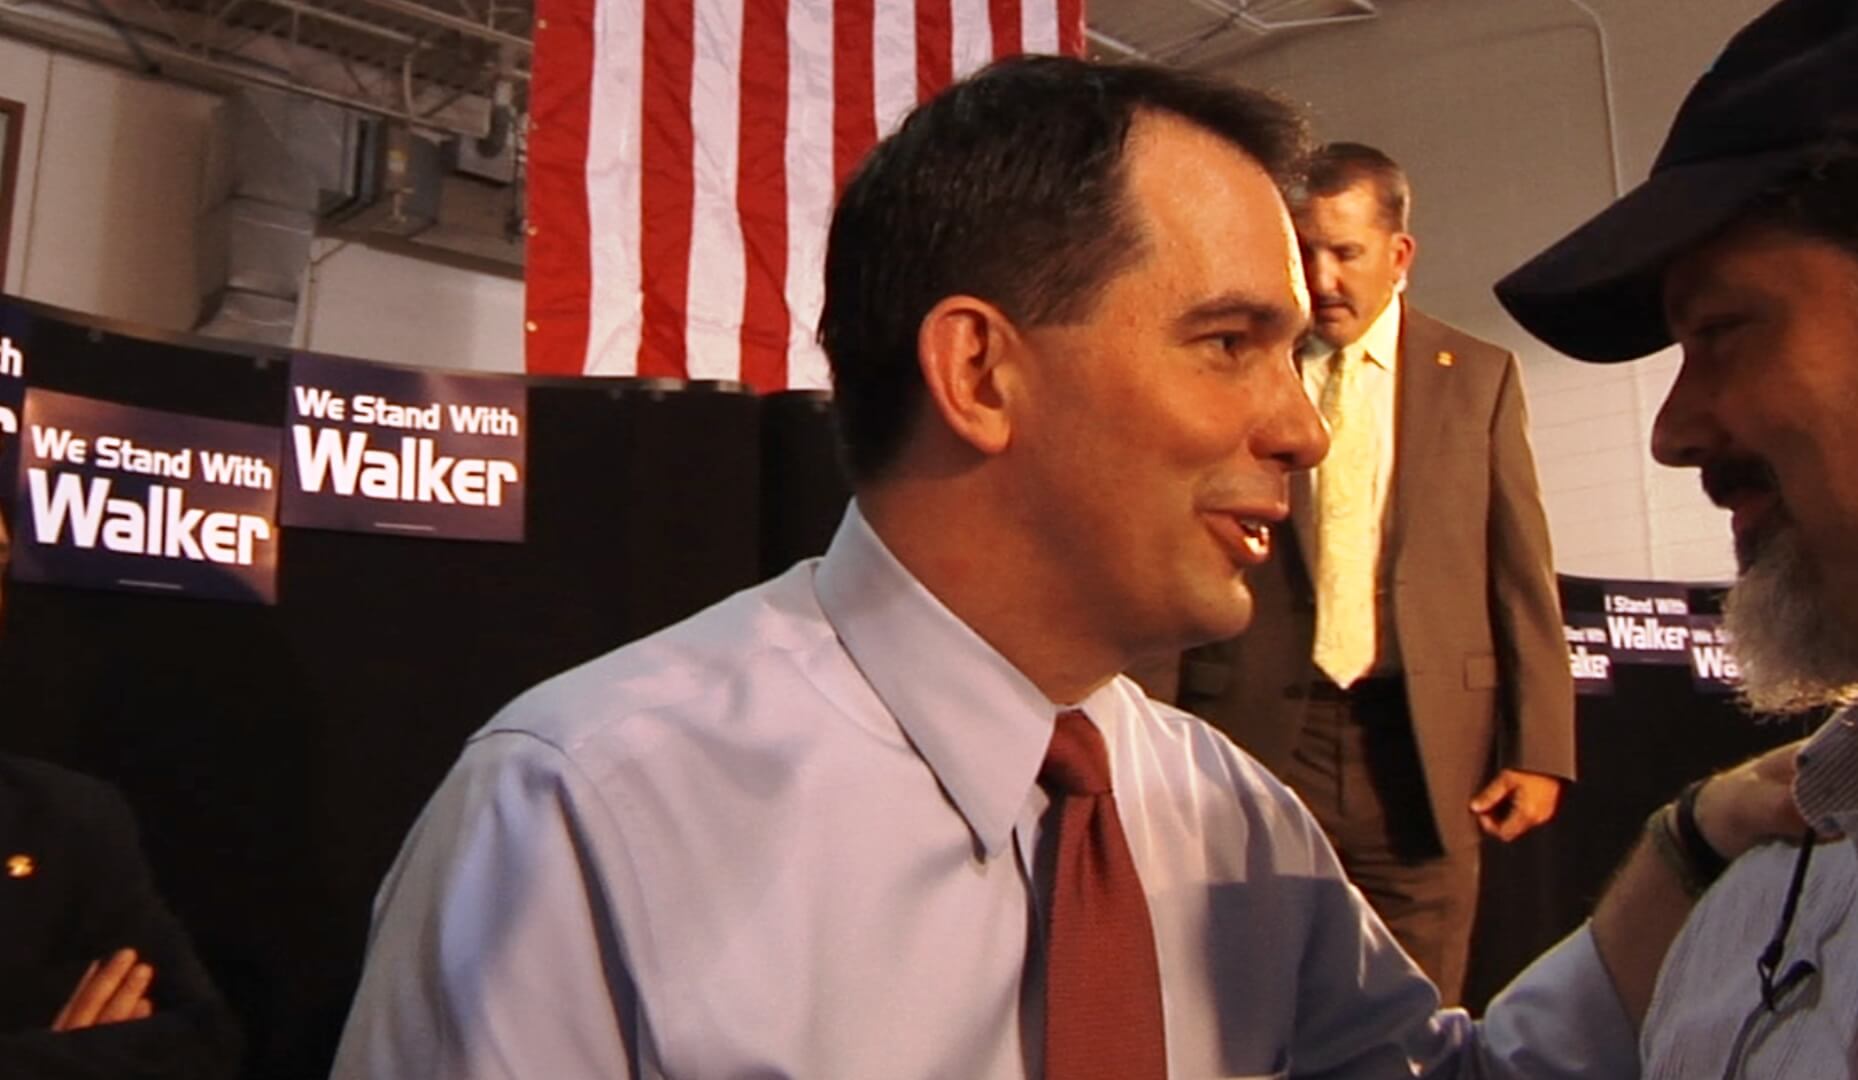 A man wearing a shirt and a tie is greeting people out of frame. In the back, there are posters that say "We Stand with Walker."